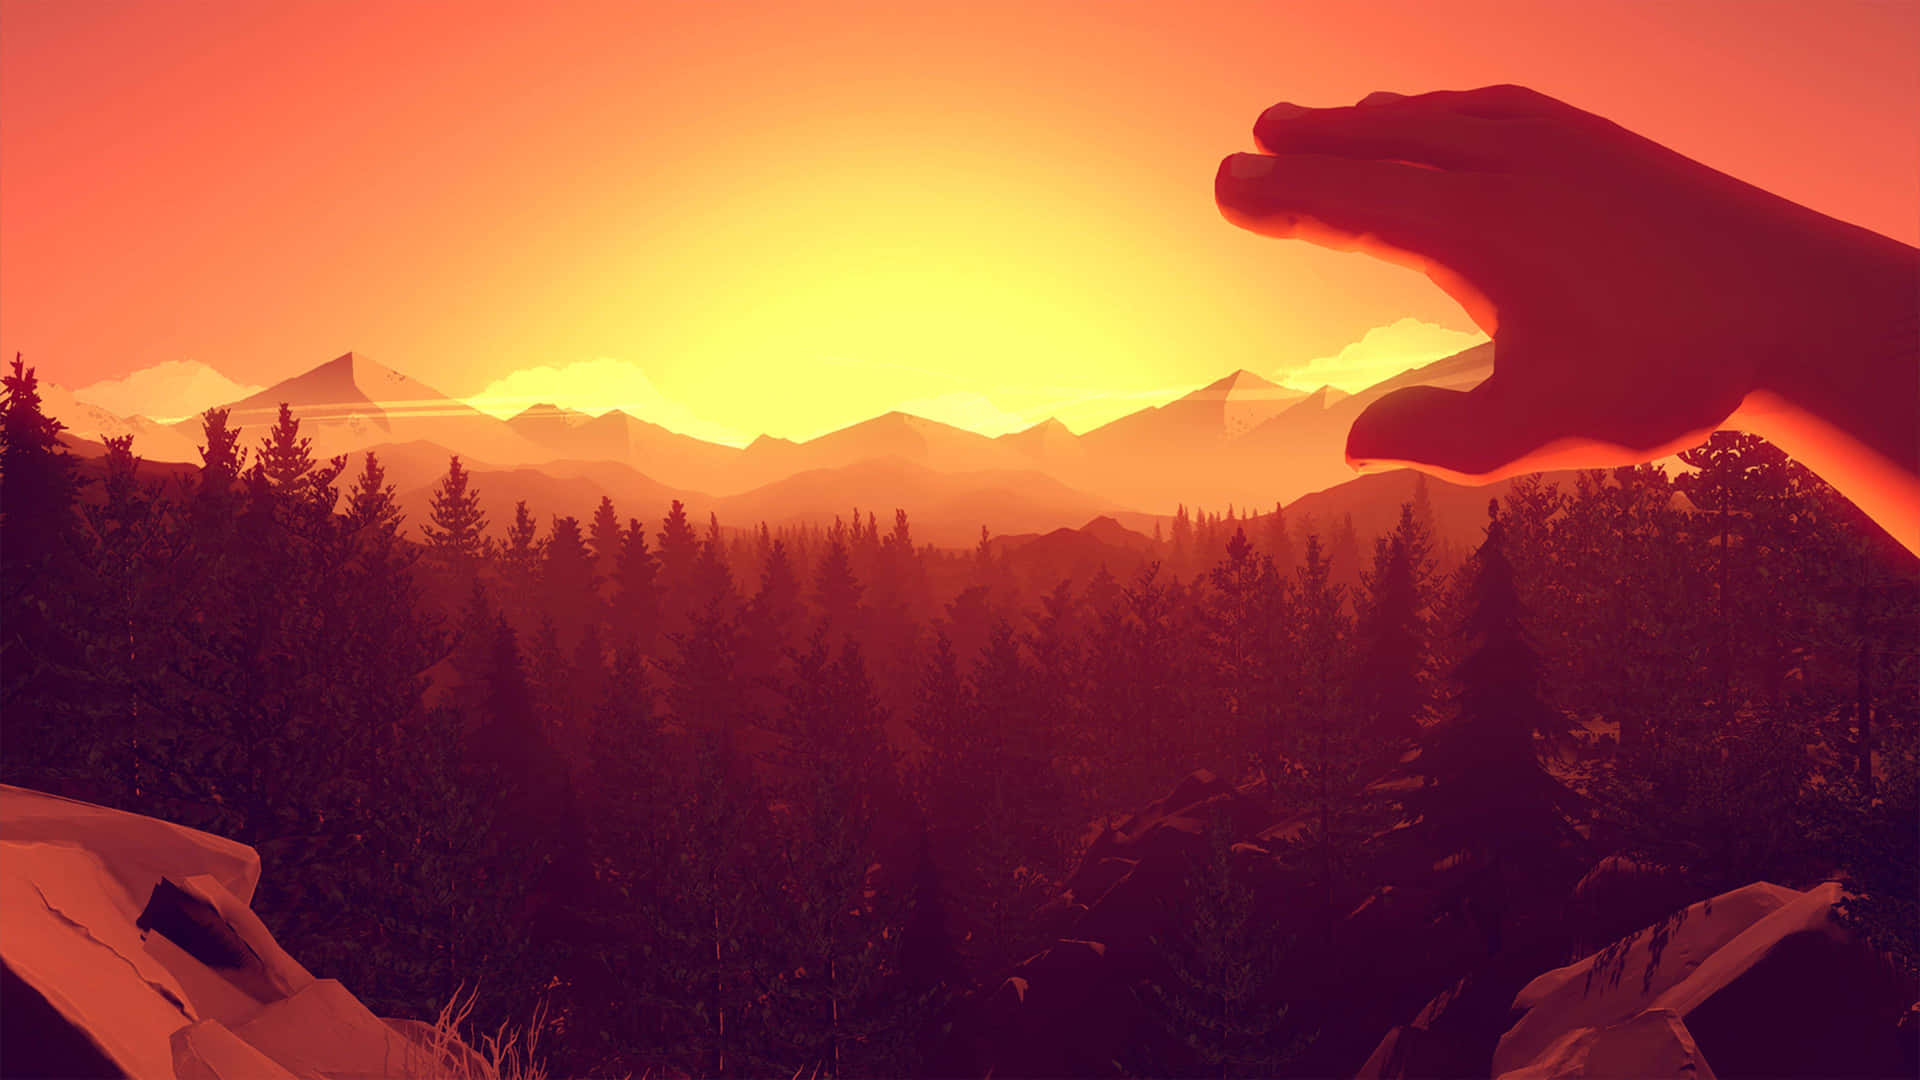 Enjoy the beauty of the wilderness with Firewatch